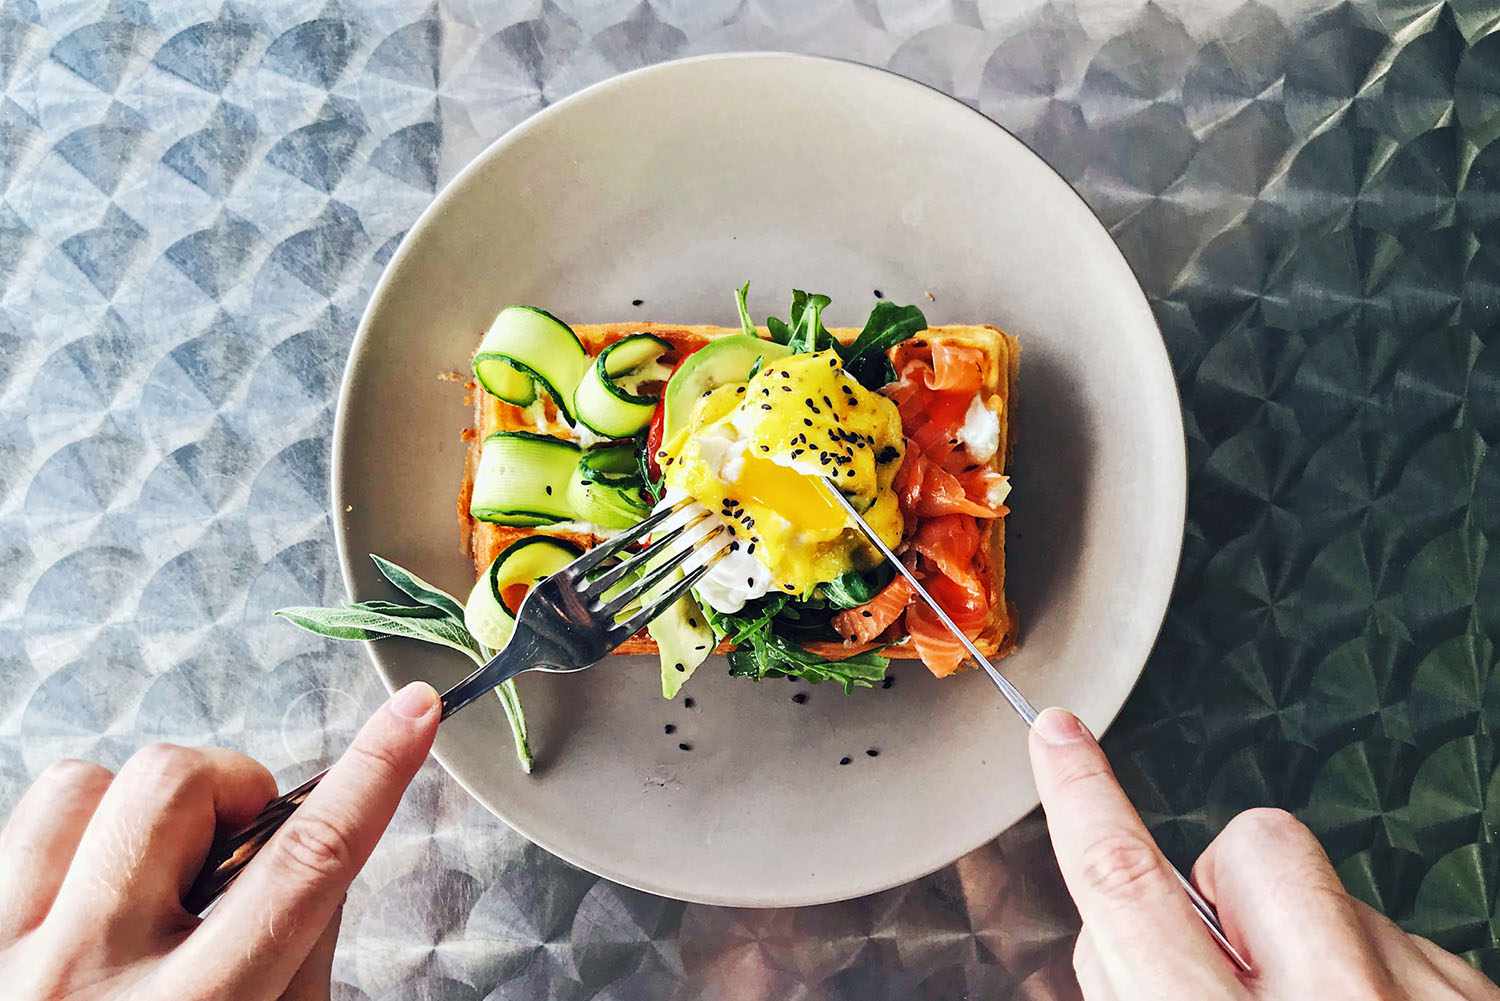 Eating brunch with waffle, avocado, cucumber, salmon and poached egg, personal perspective